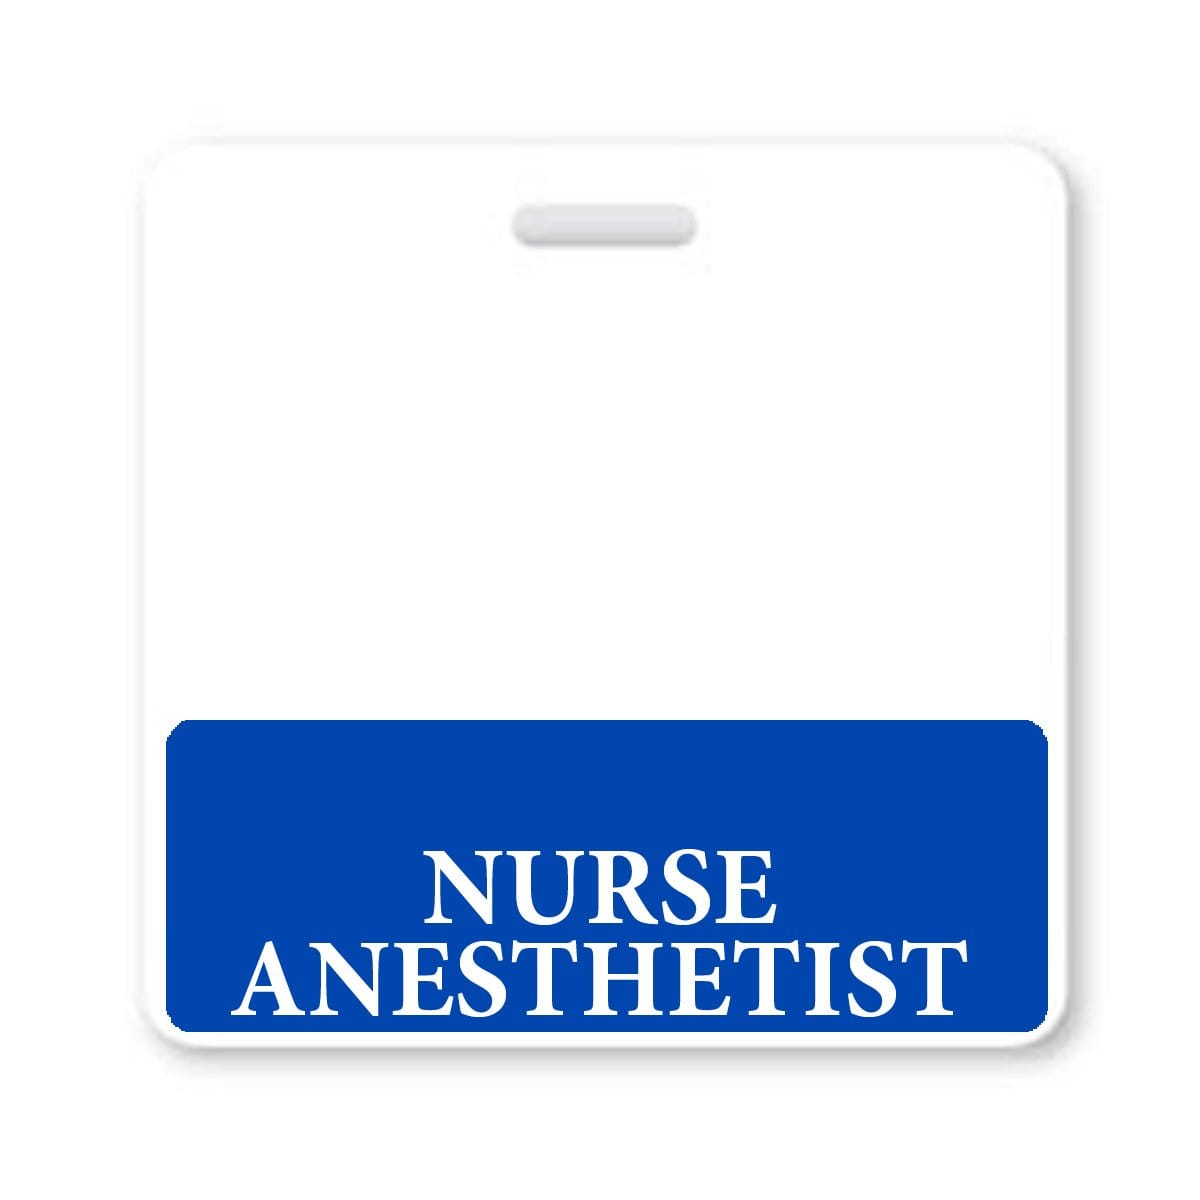 RN Horizontal Badge Buddy with Blue Border by Specialist ID